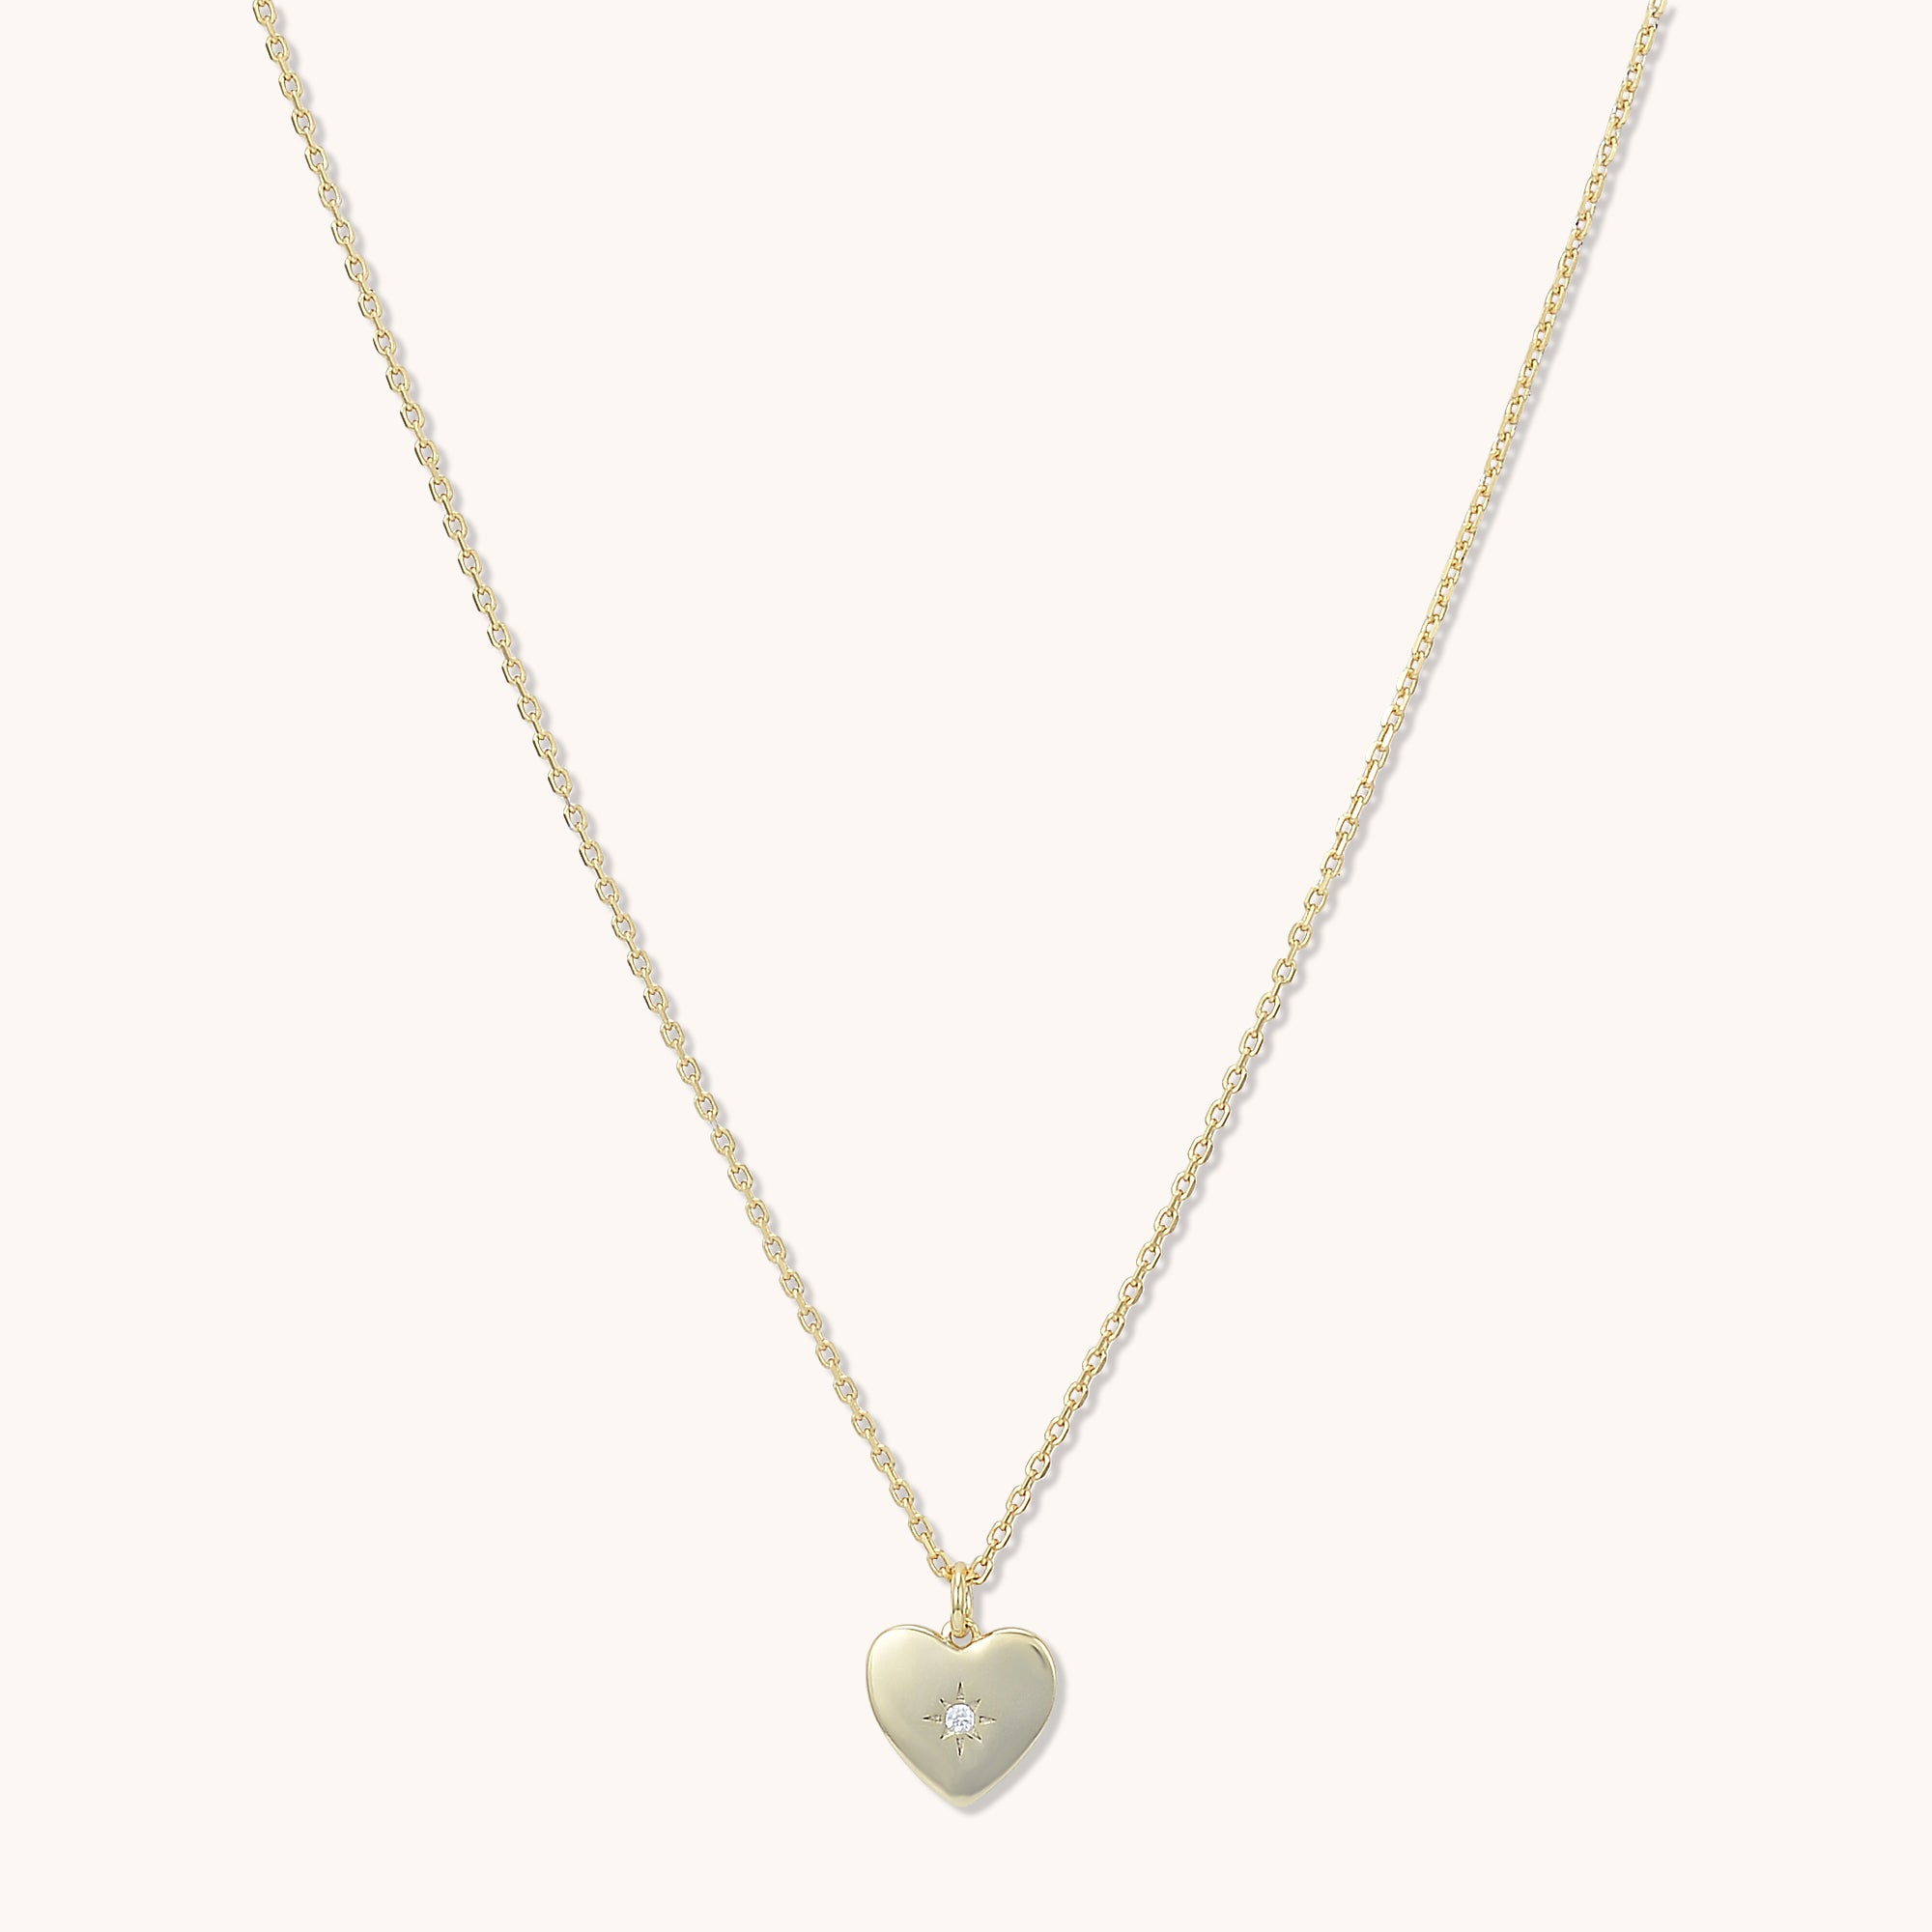 North Star Heart Necklace Gold